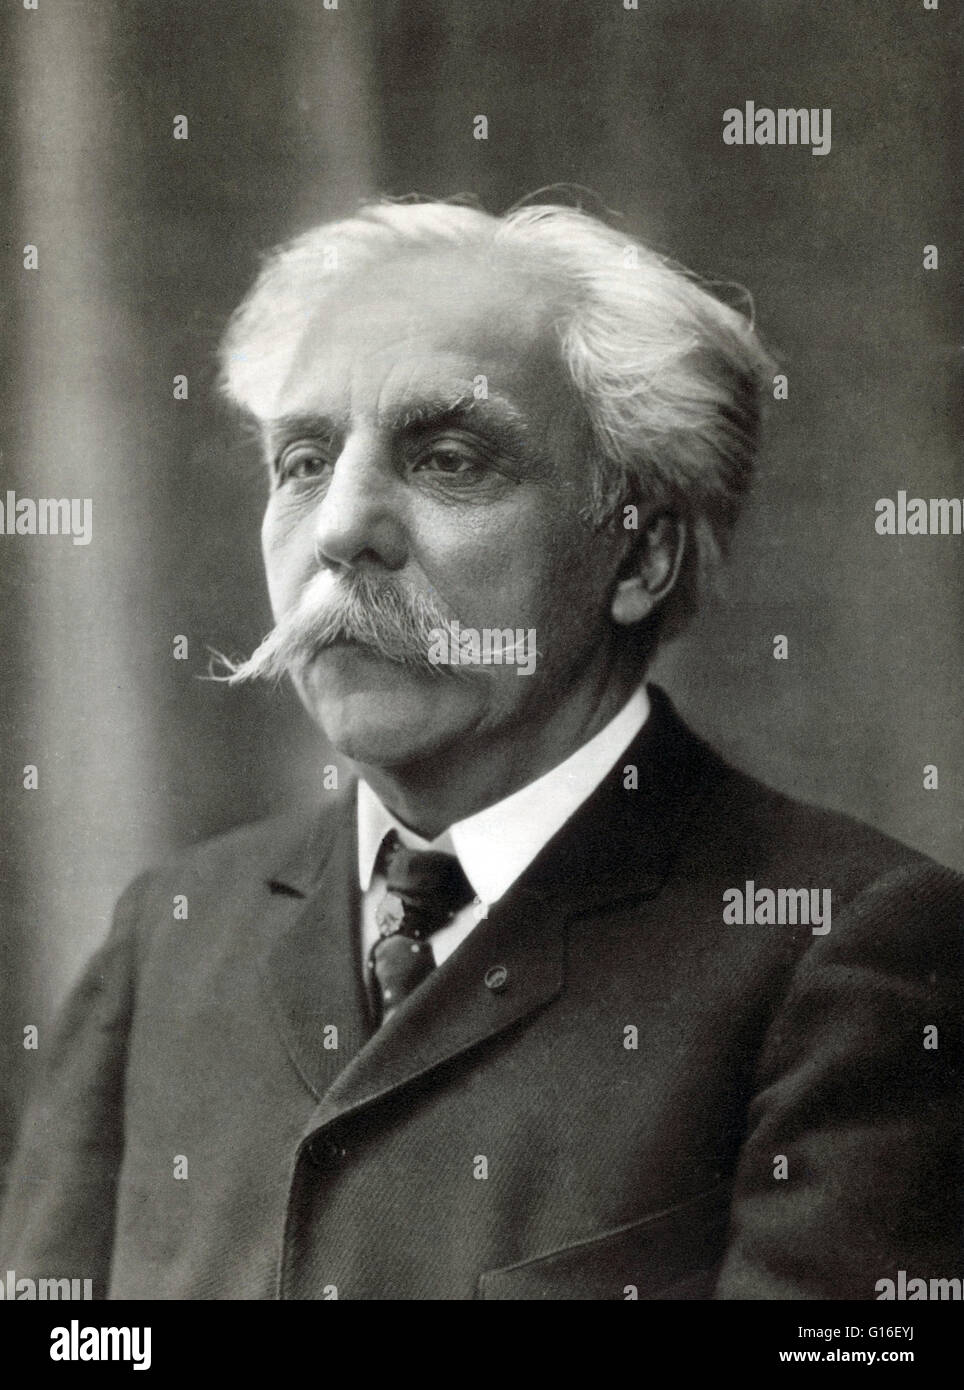 Gabriel Urbain Fauré (May 12,1845 - November 4, 1924) was a French composer, organist, pianist and teacher. He was one of the foremost French composers of his generation, and his musical style influenced many 20th century composers. At the age of 9, he wa Stock Photo